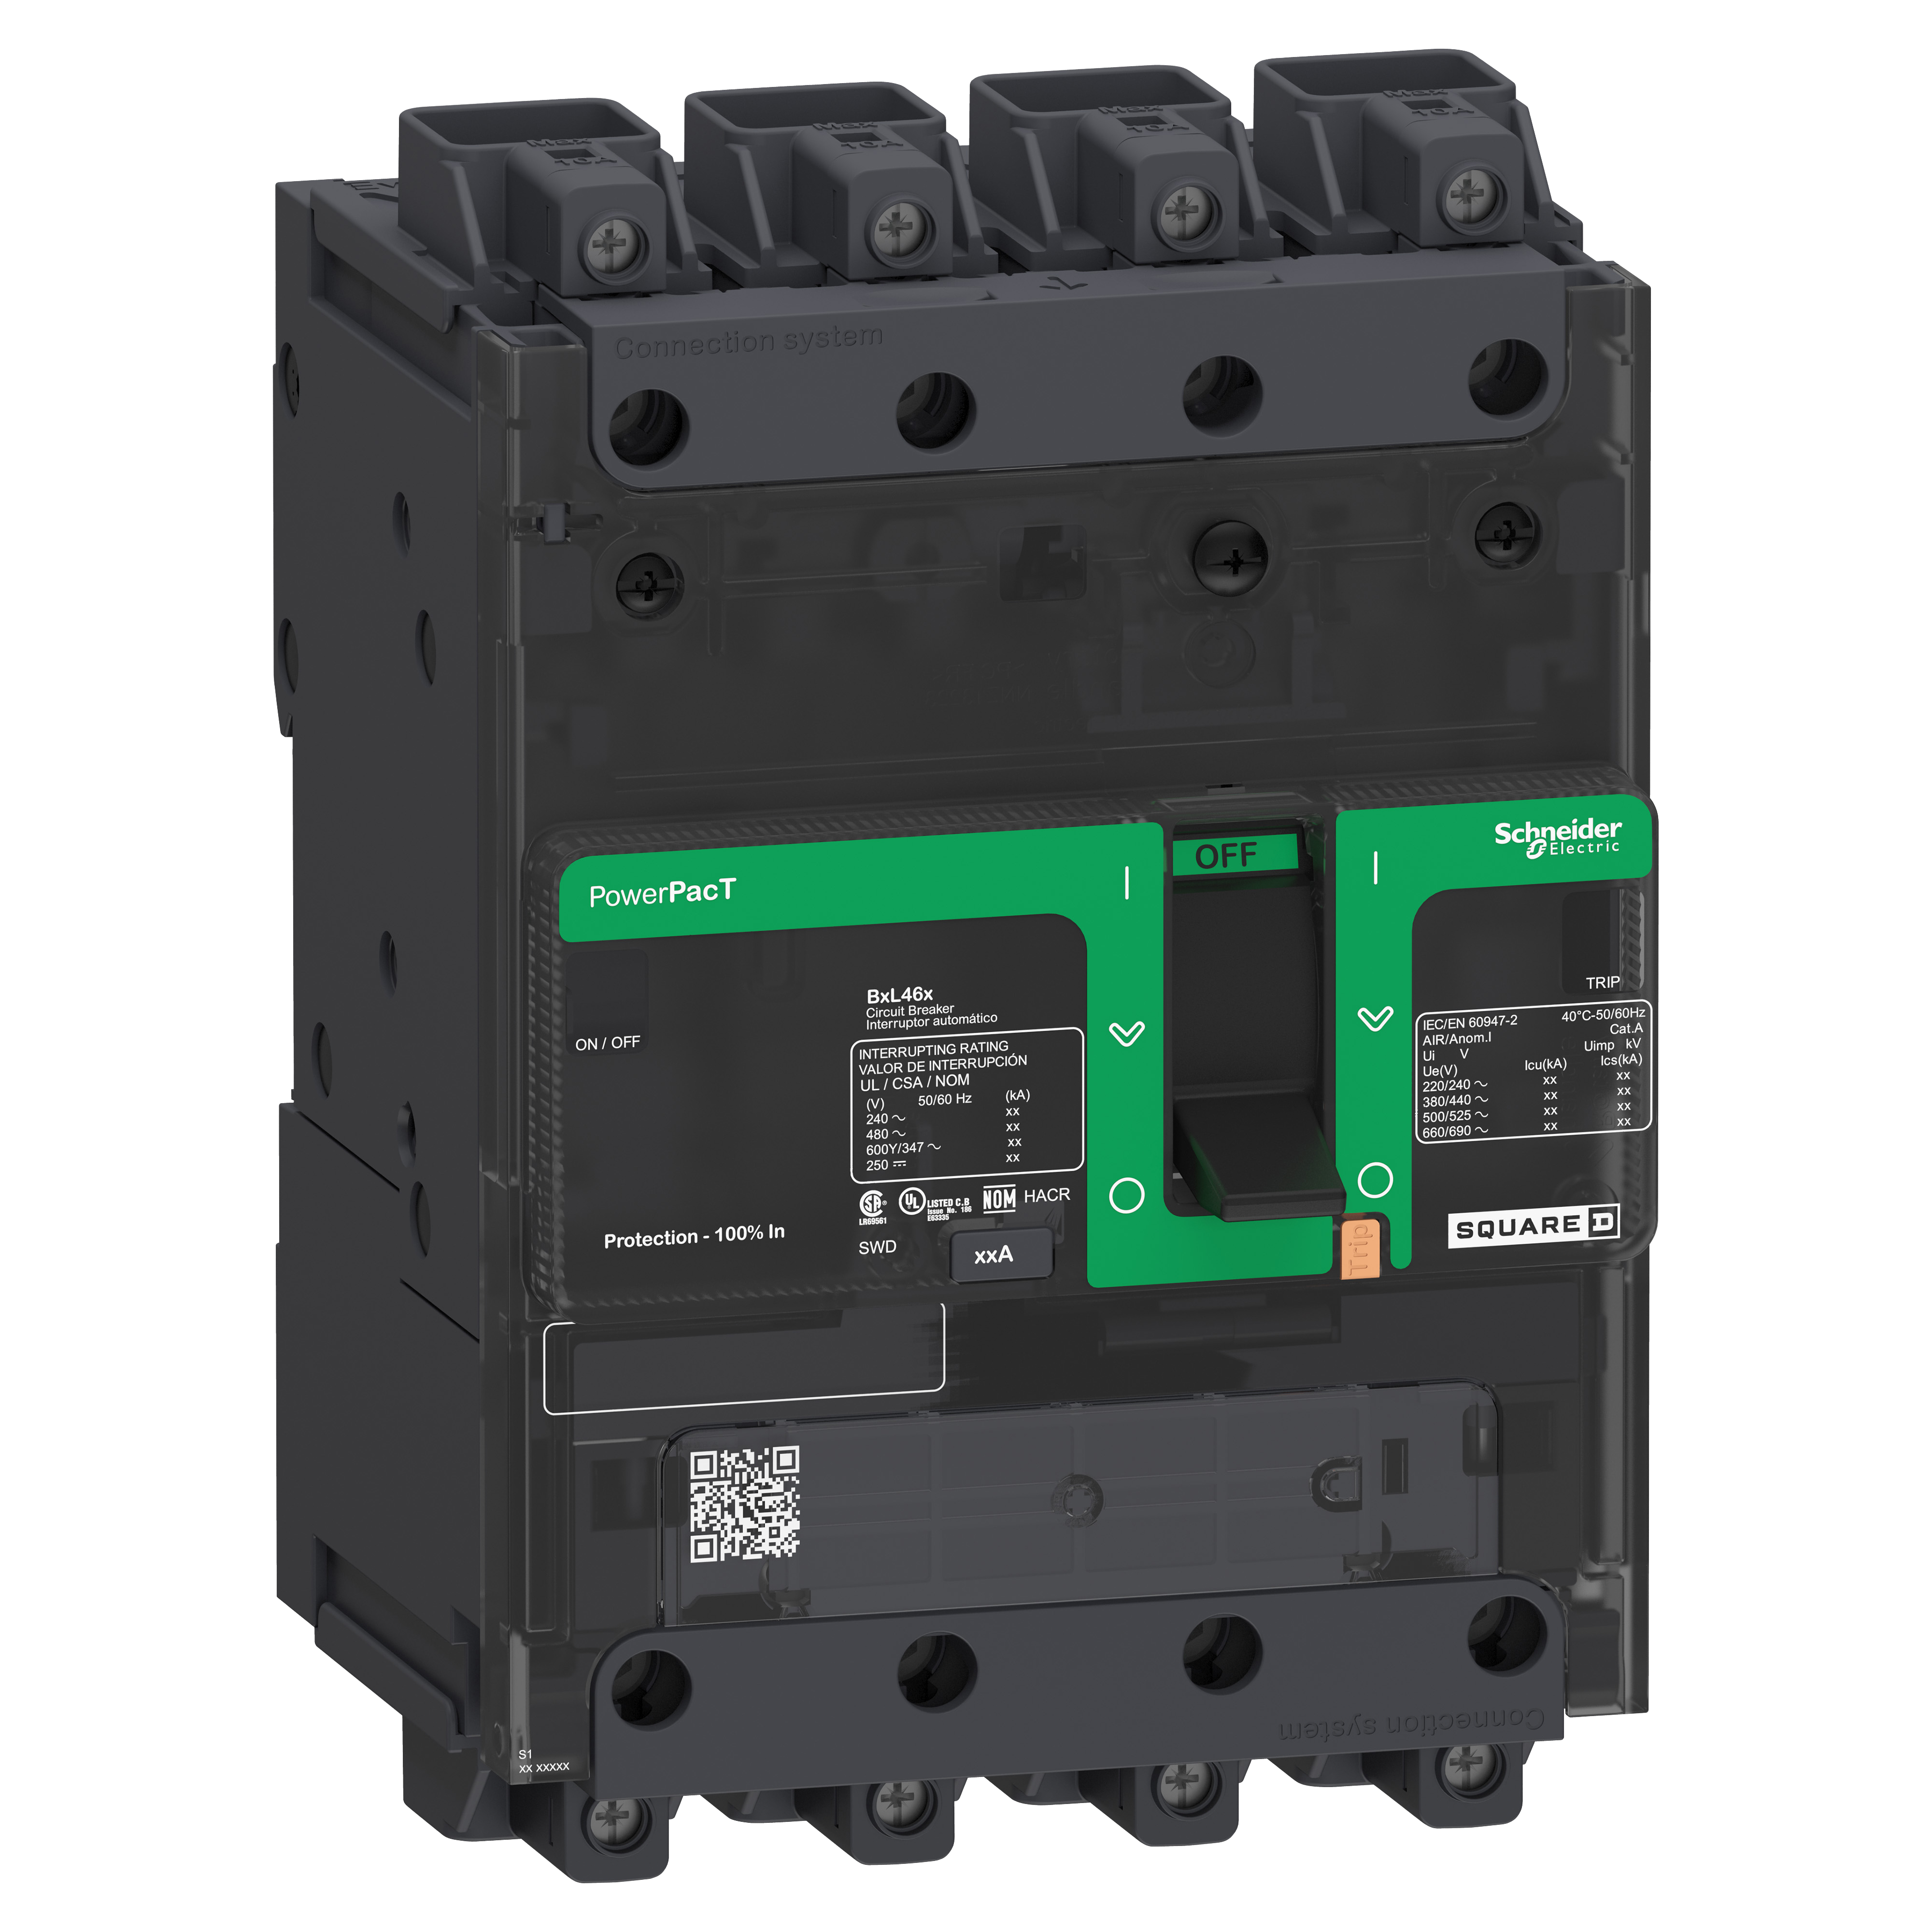 Circuit breaker, PowerPacT B, 40A, 4 pole, 600Y/347VAC, 18kA, lugs, thermal magnetic, 80%, control wire ON end